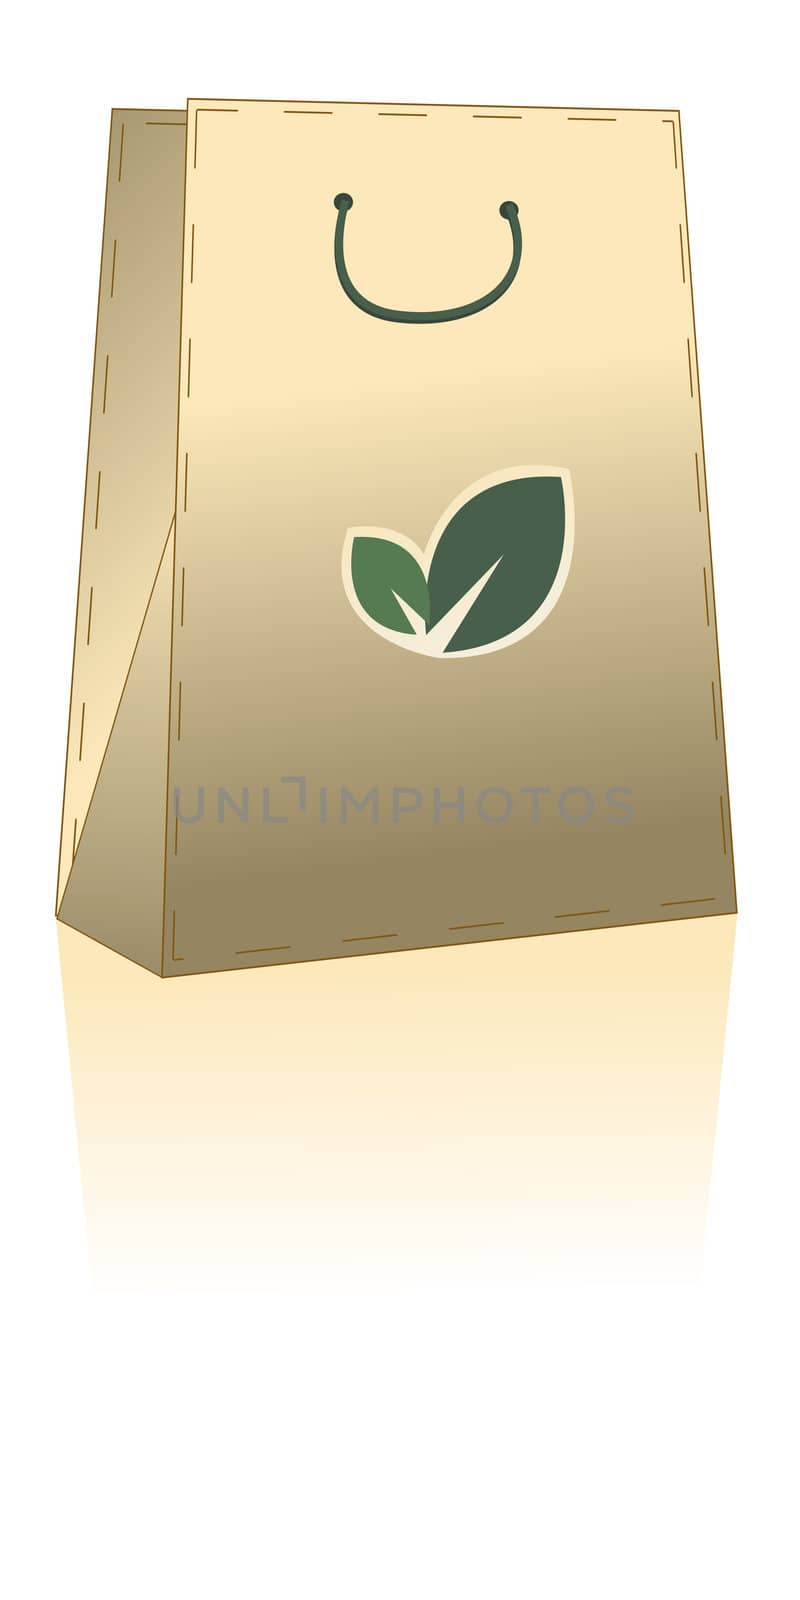 Paper shopping bag and reflection over white background